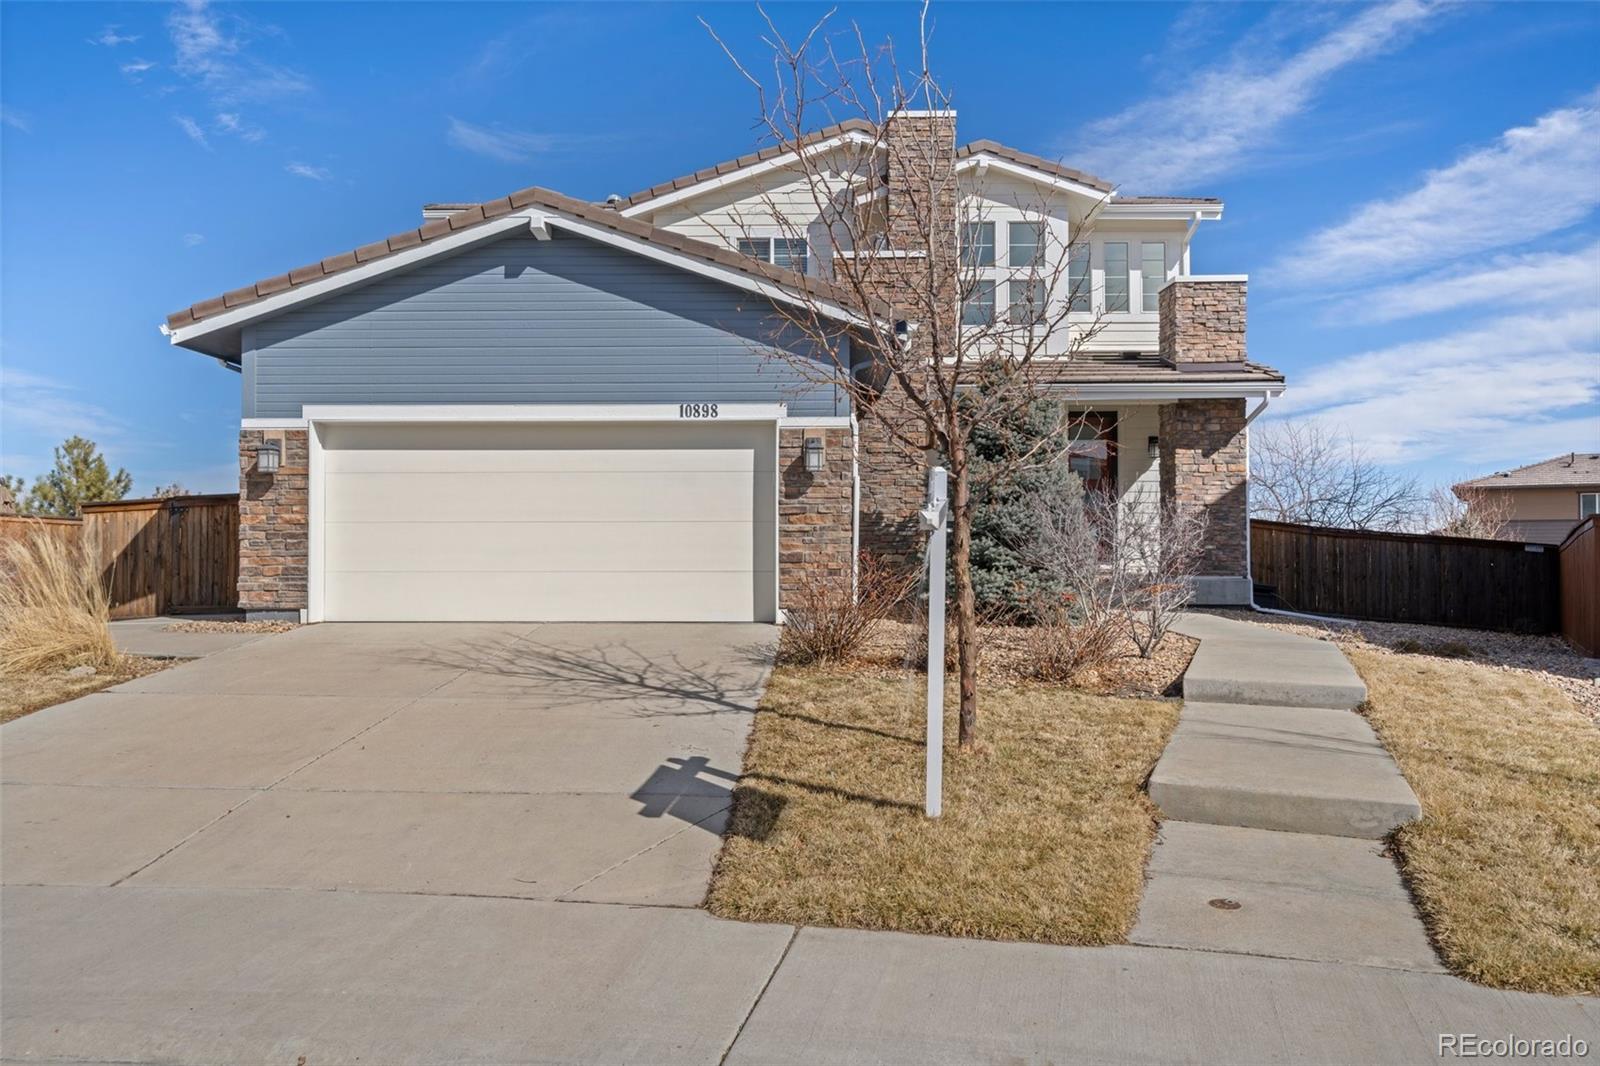 10898  touchstone loop, Parker sold home. Closed on 2024-03-15 for $655,000.